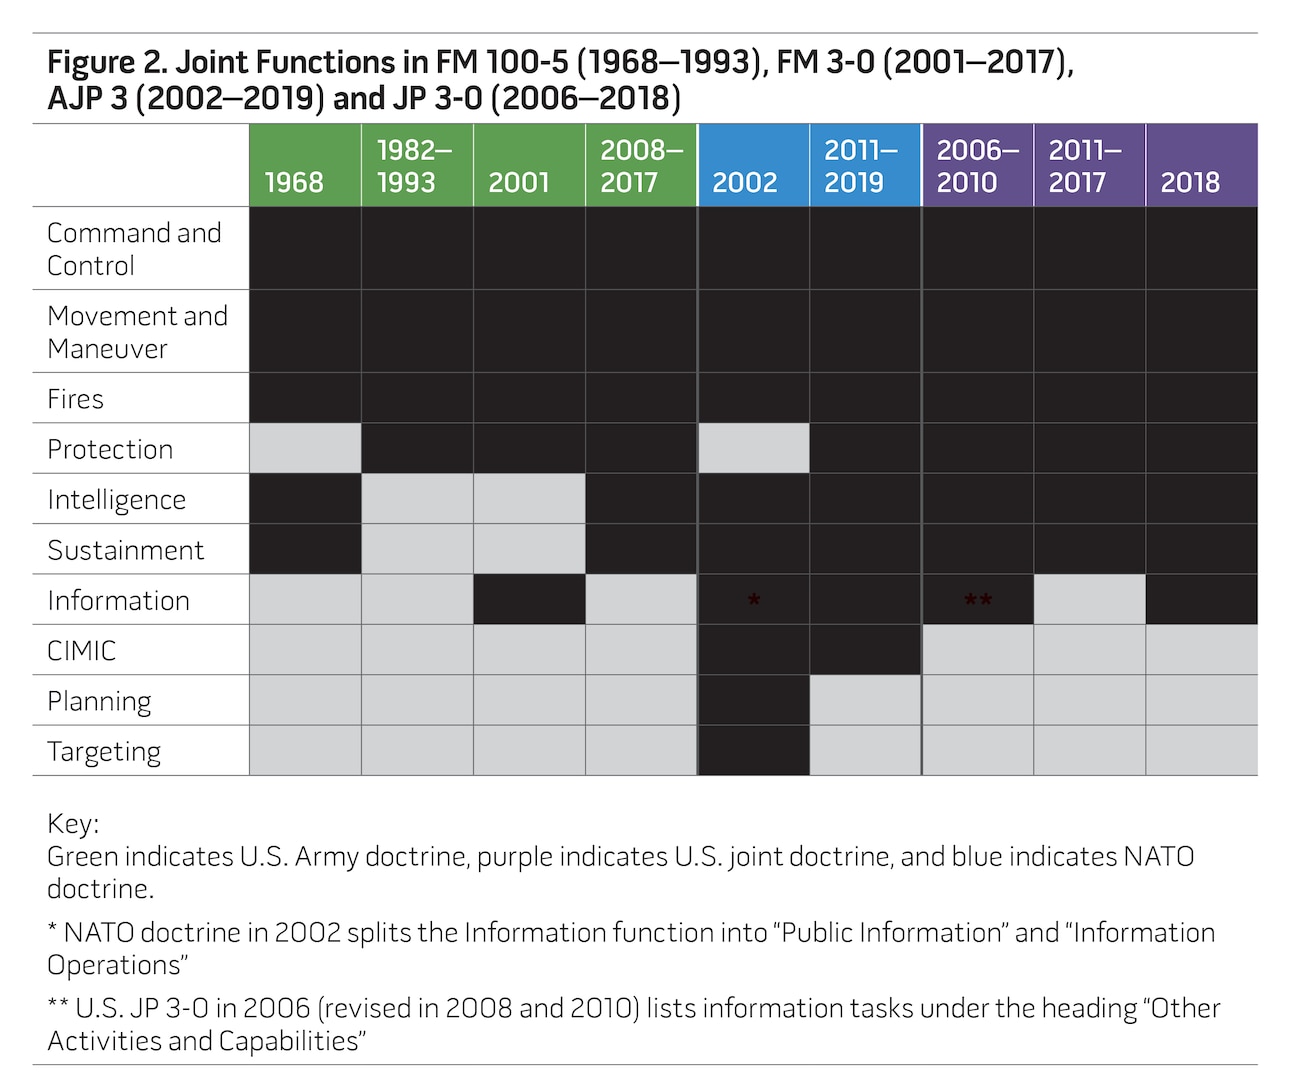 Figure 2. Joint Functions in FM 100-5 (1968–1993), FM 3-0 (2001–2017),
AJP 3 (2002–2019) and JP 3-0 (2006–2018)